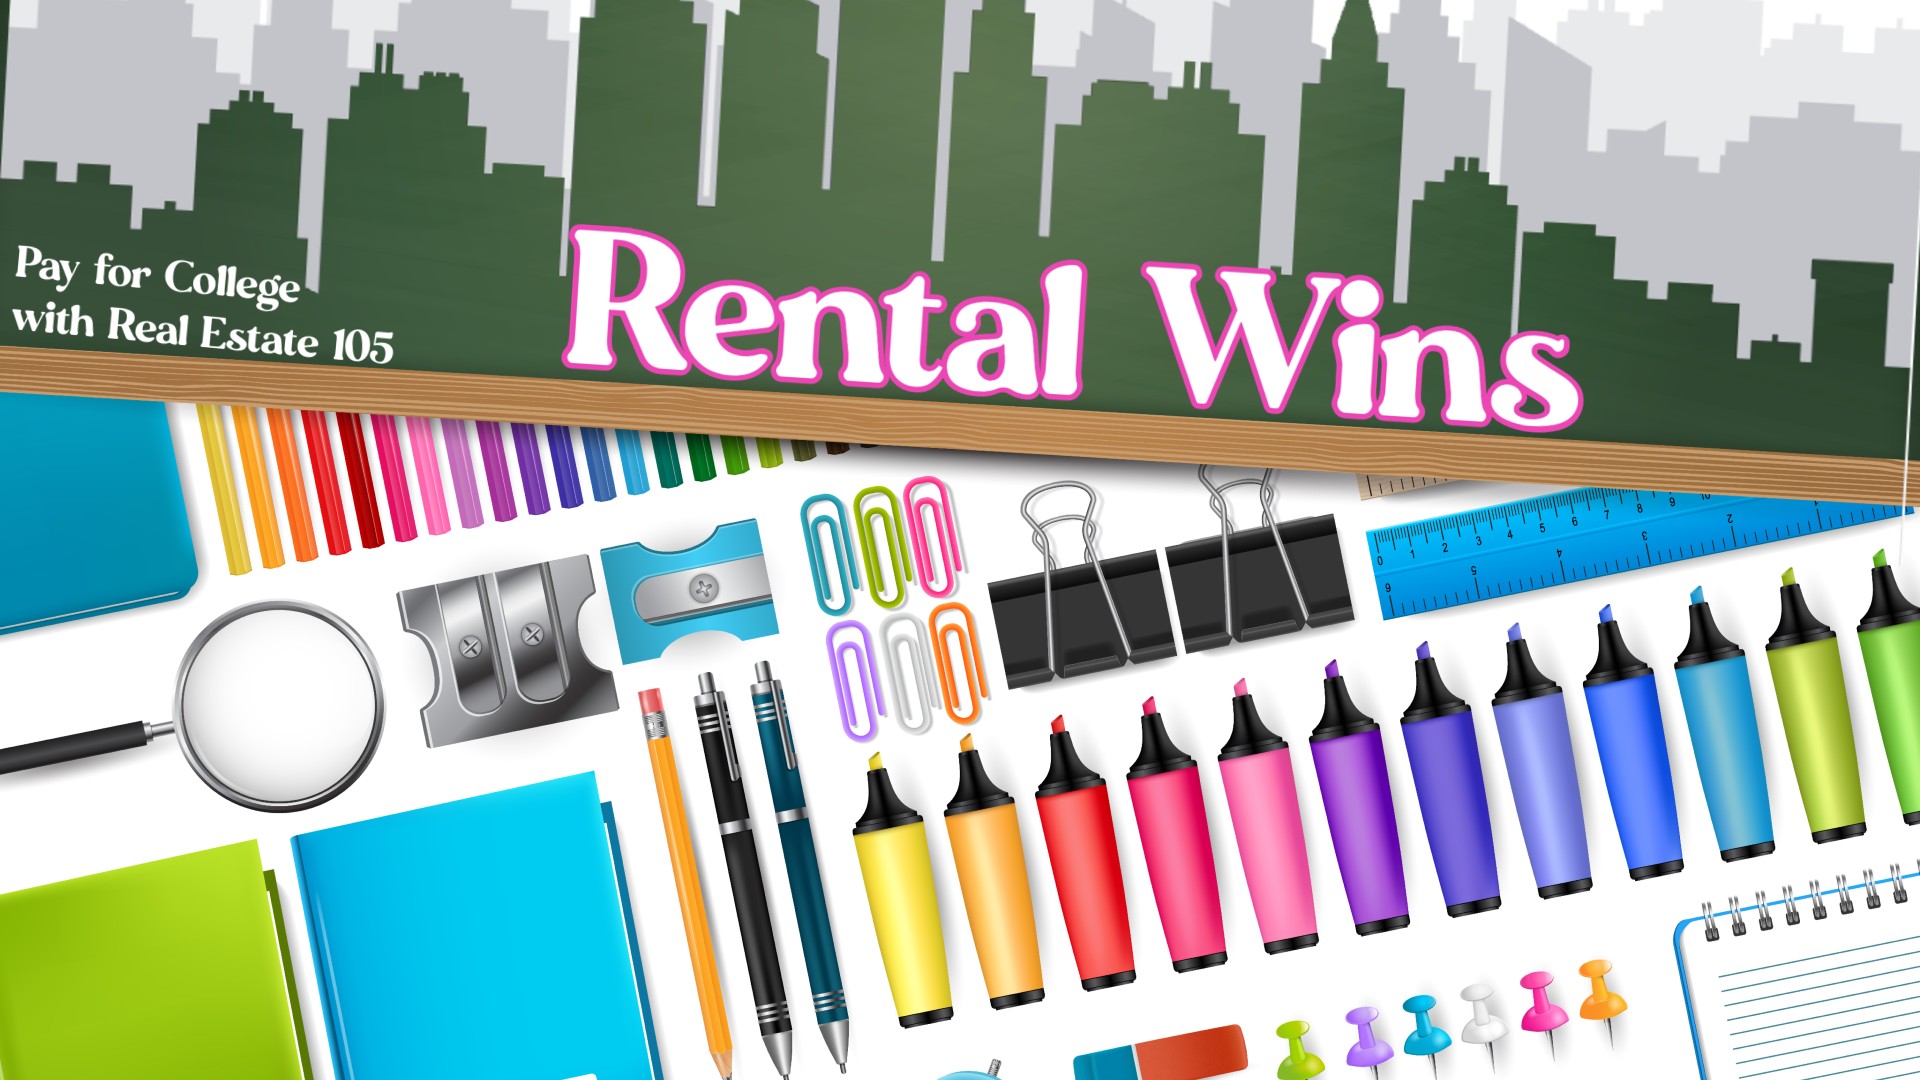 Pay for College with Real Estate 105: Rental Wins